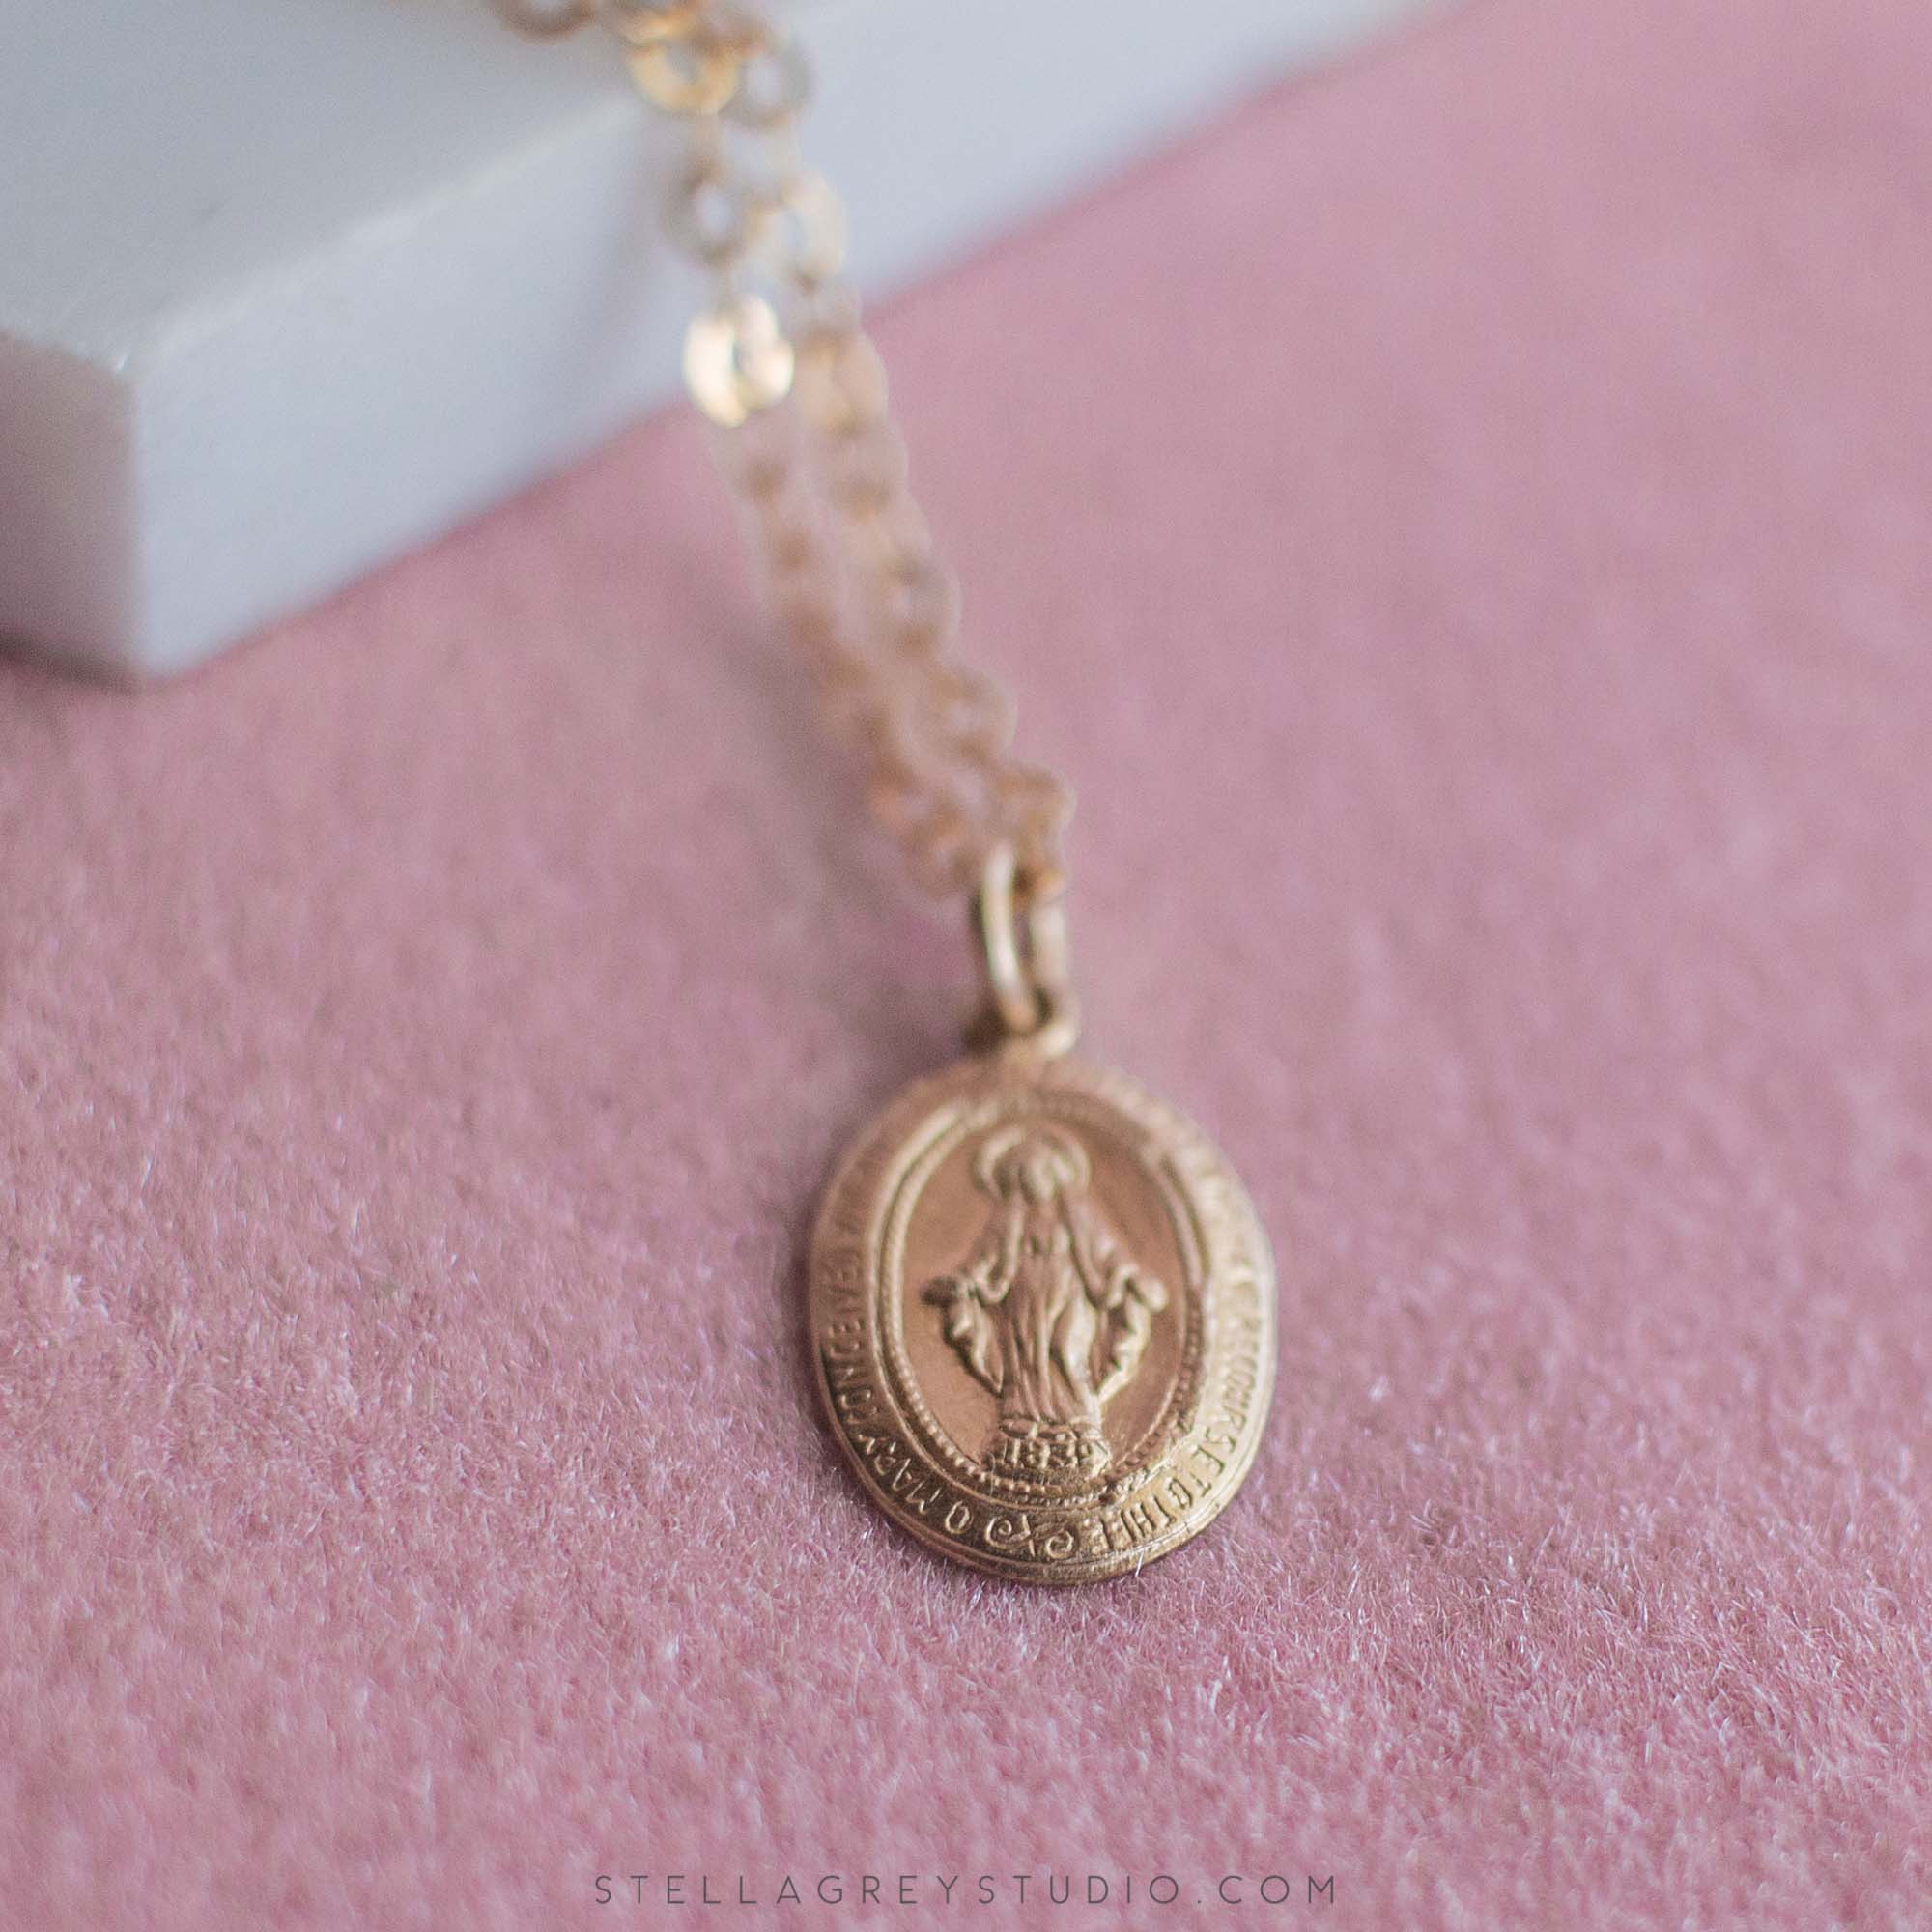 The Virgin Mary Necklace